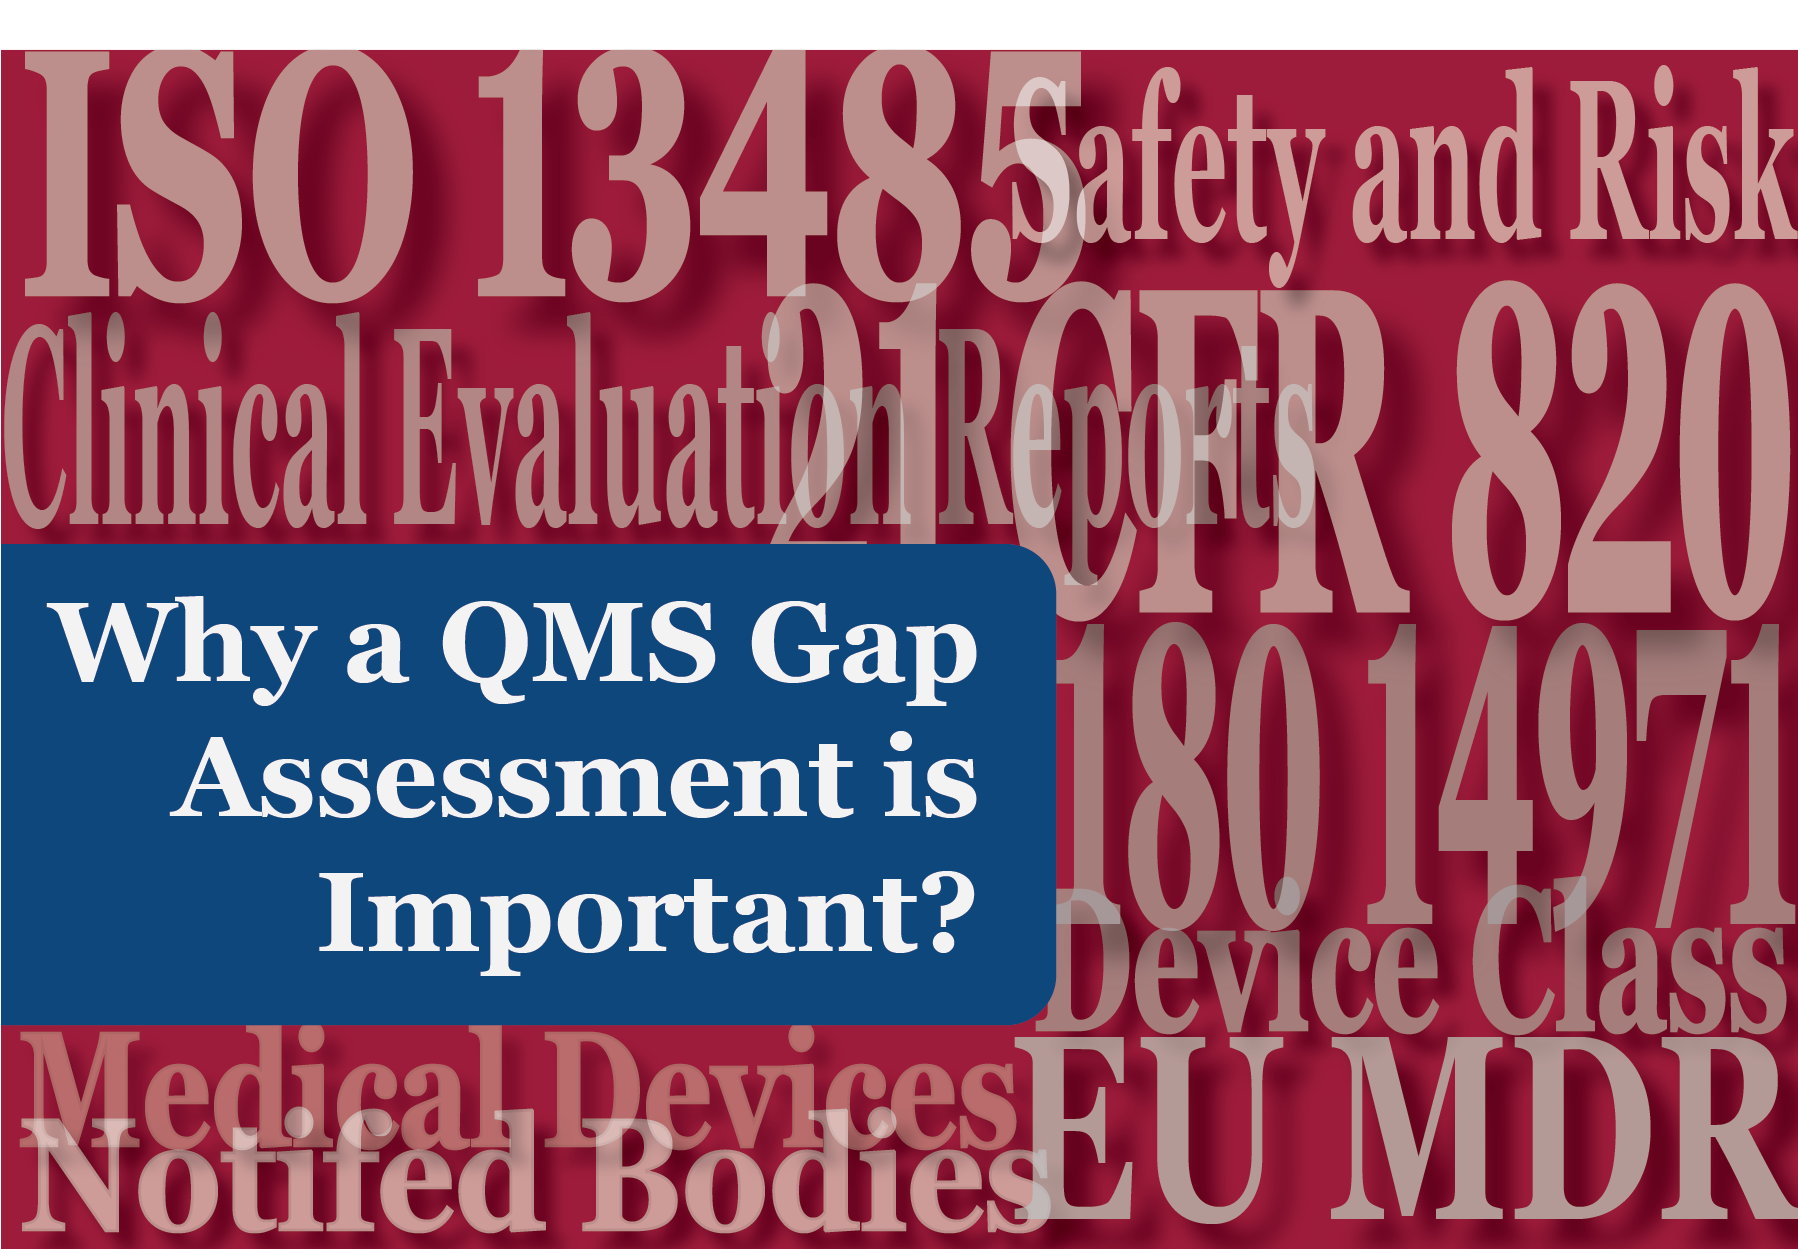 Why a QMS Gap Assessment is Important?